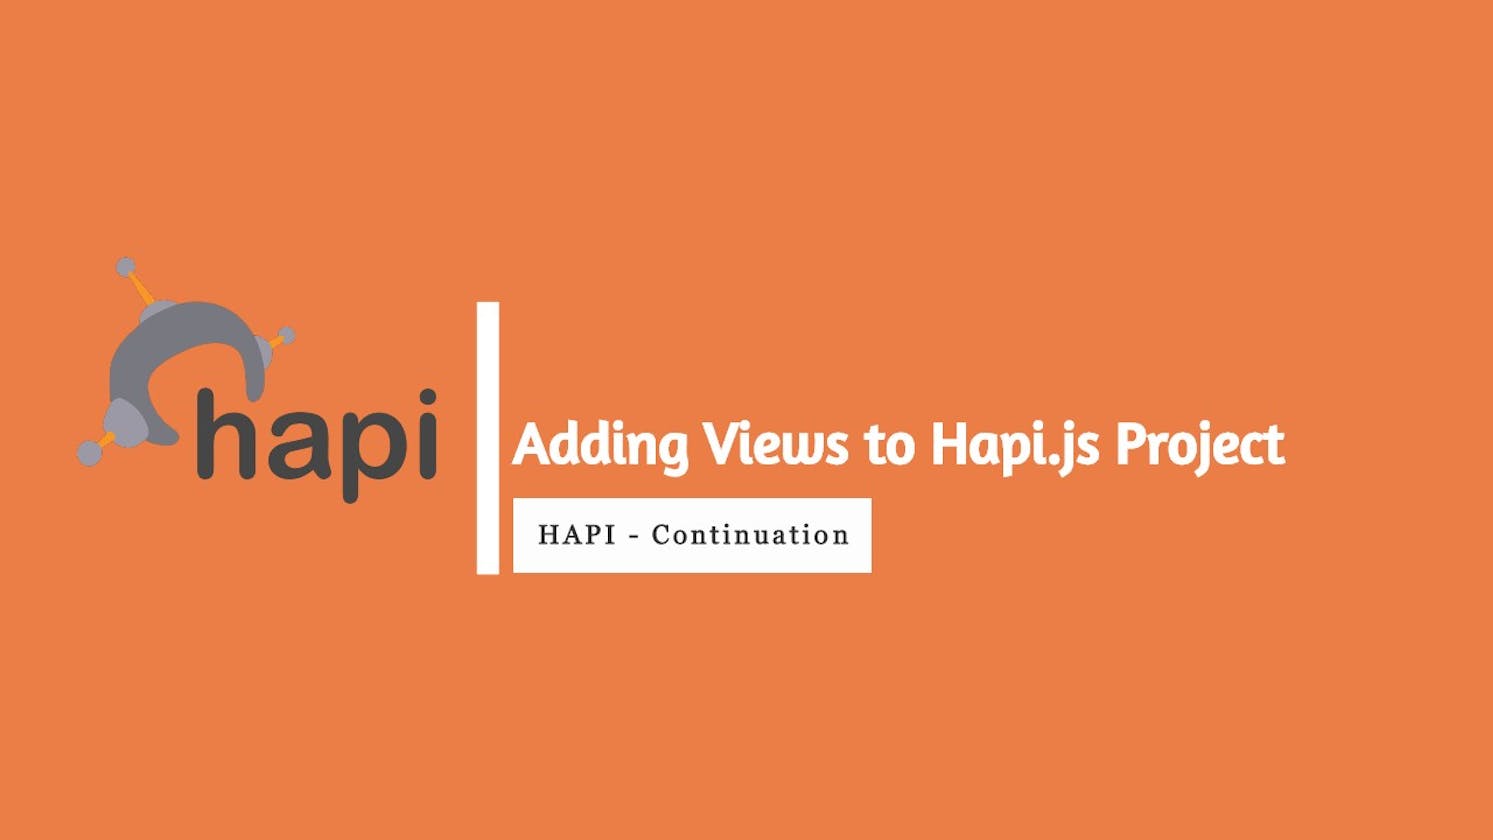 Add Views to your Hapi.js project with Vision